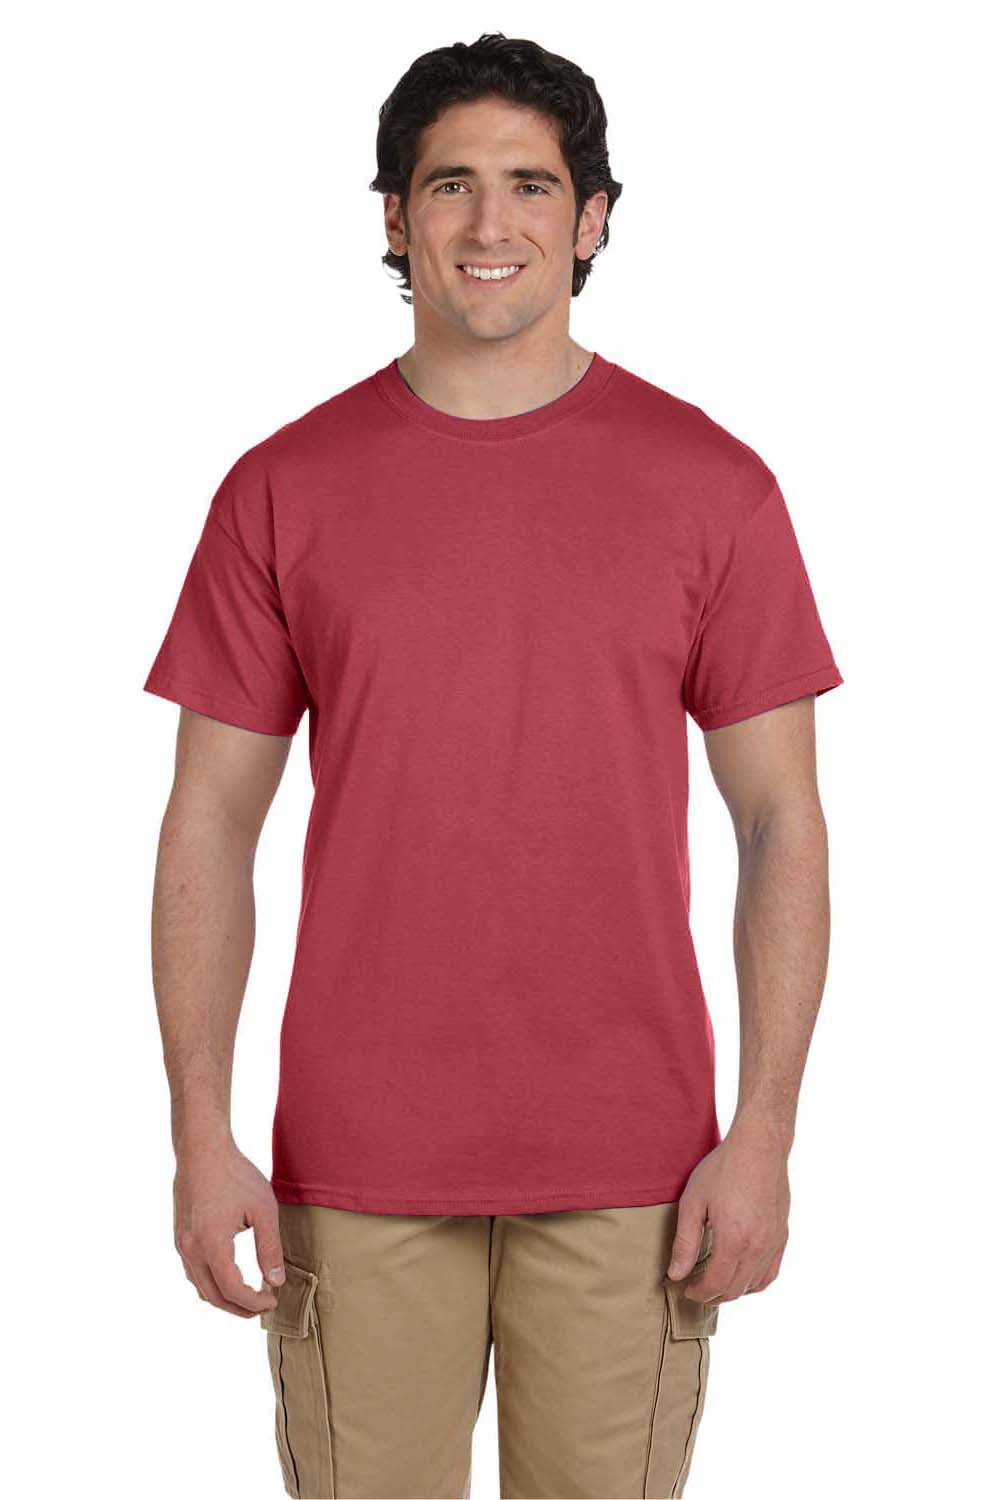 Fruit Of The Loom 3931 Mens HD Jersey Short Sleeve Crewneck T-Shirt Crimson Red Front